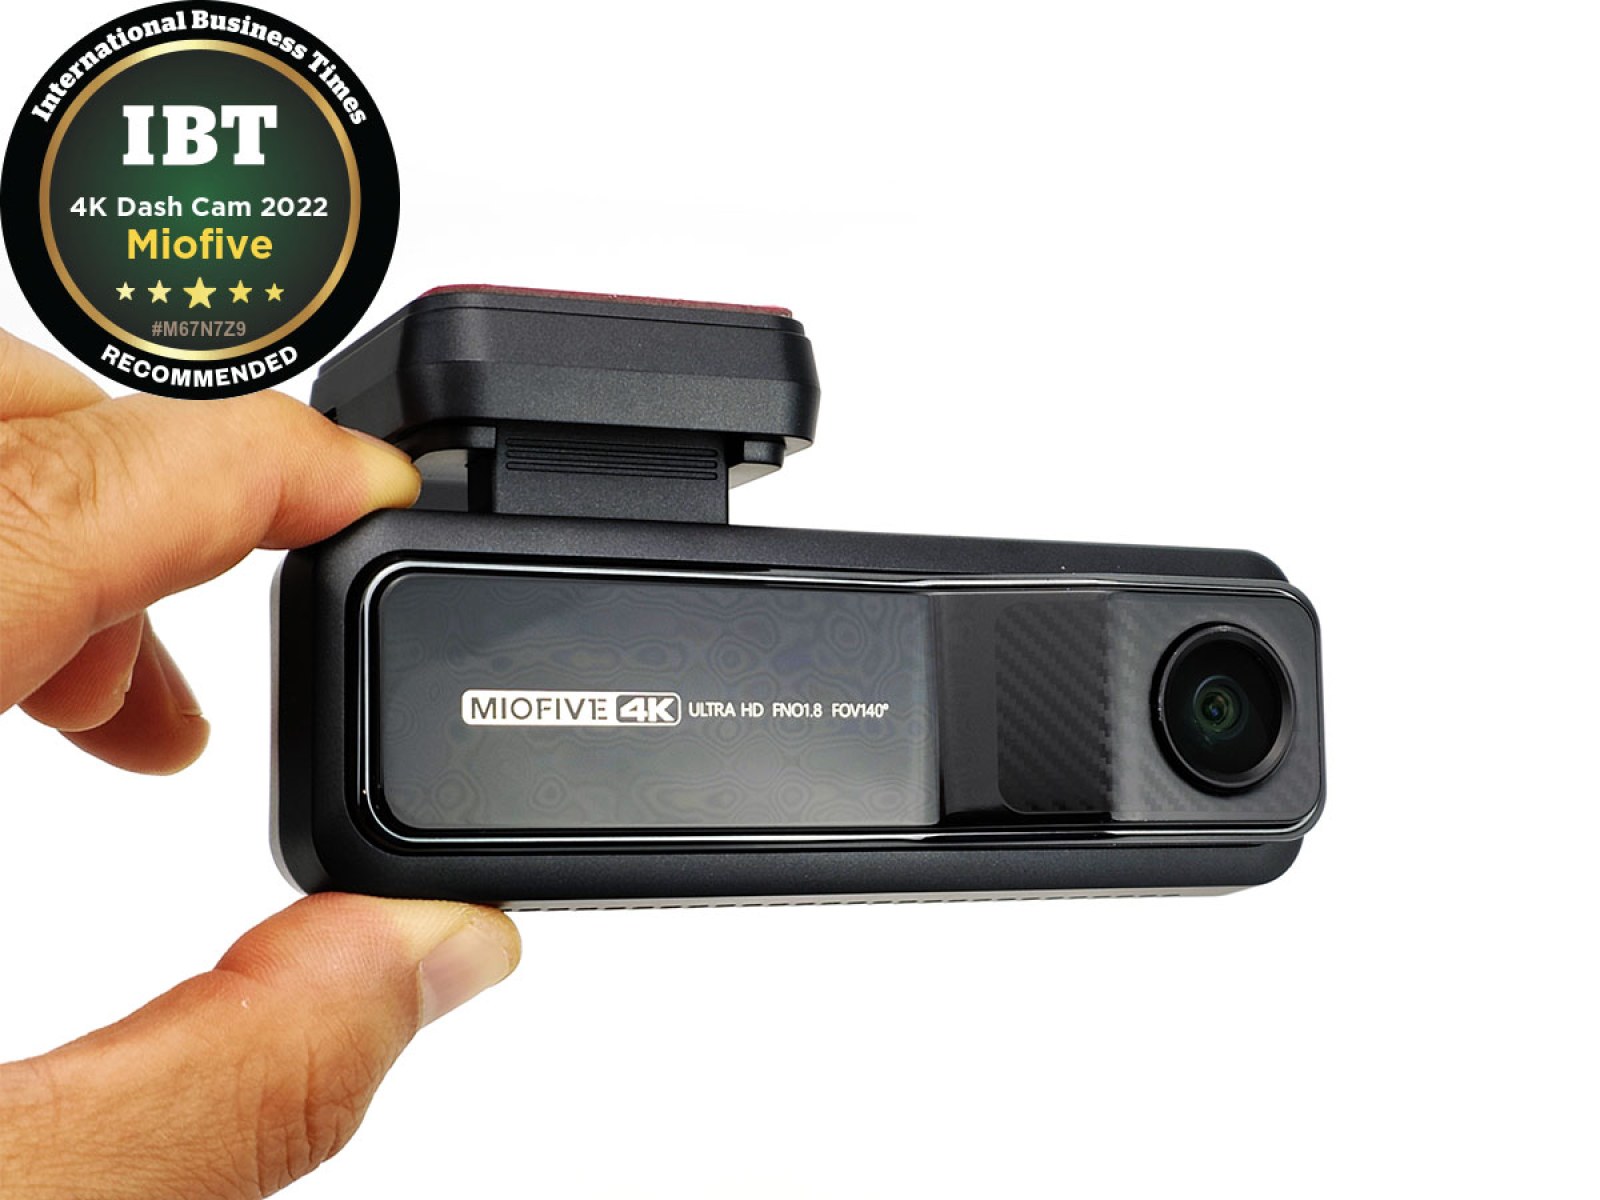 Miofive 4K Dash Cam Hands-on Review: 4K Wide-angle Dash Camera